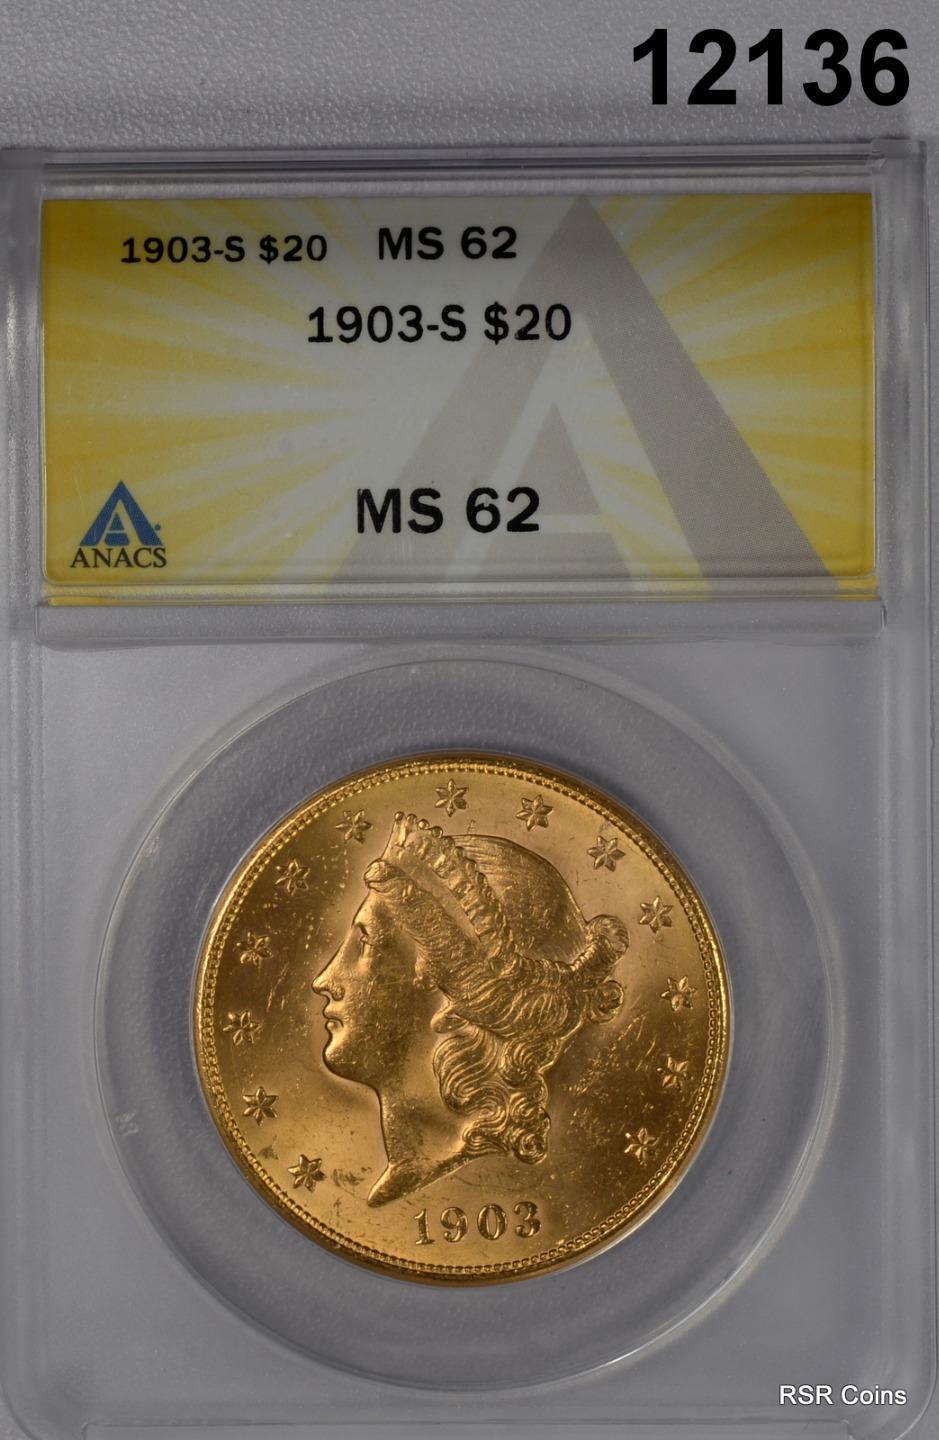 1903 S $20 GOLD LIBERTY ANACS CERTIFIED MS62 LOOKS BETTER! #12136